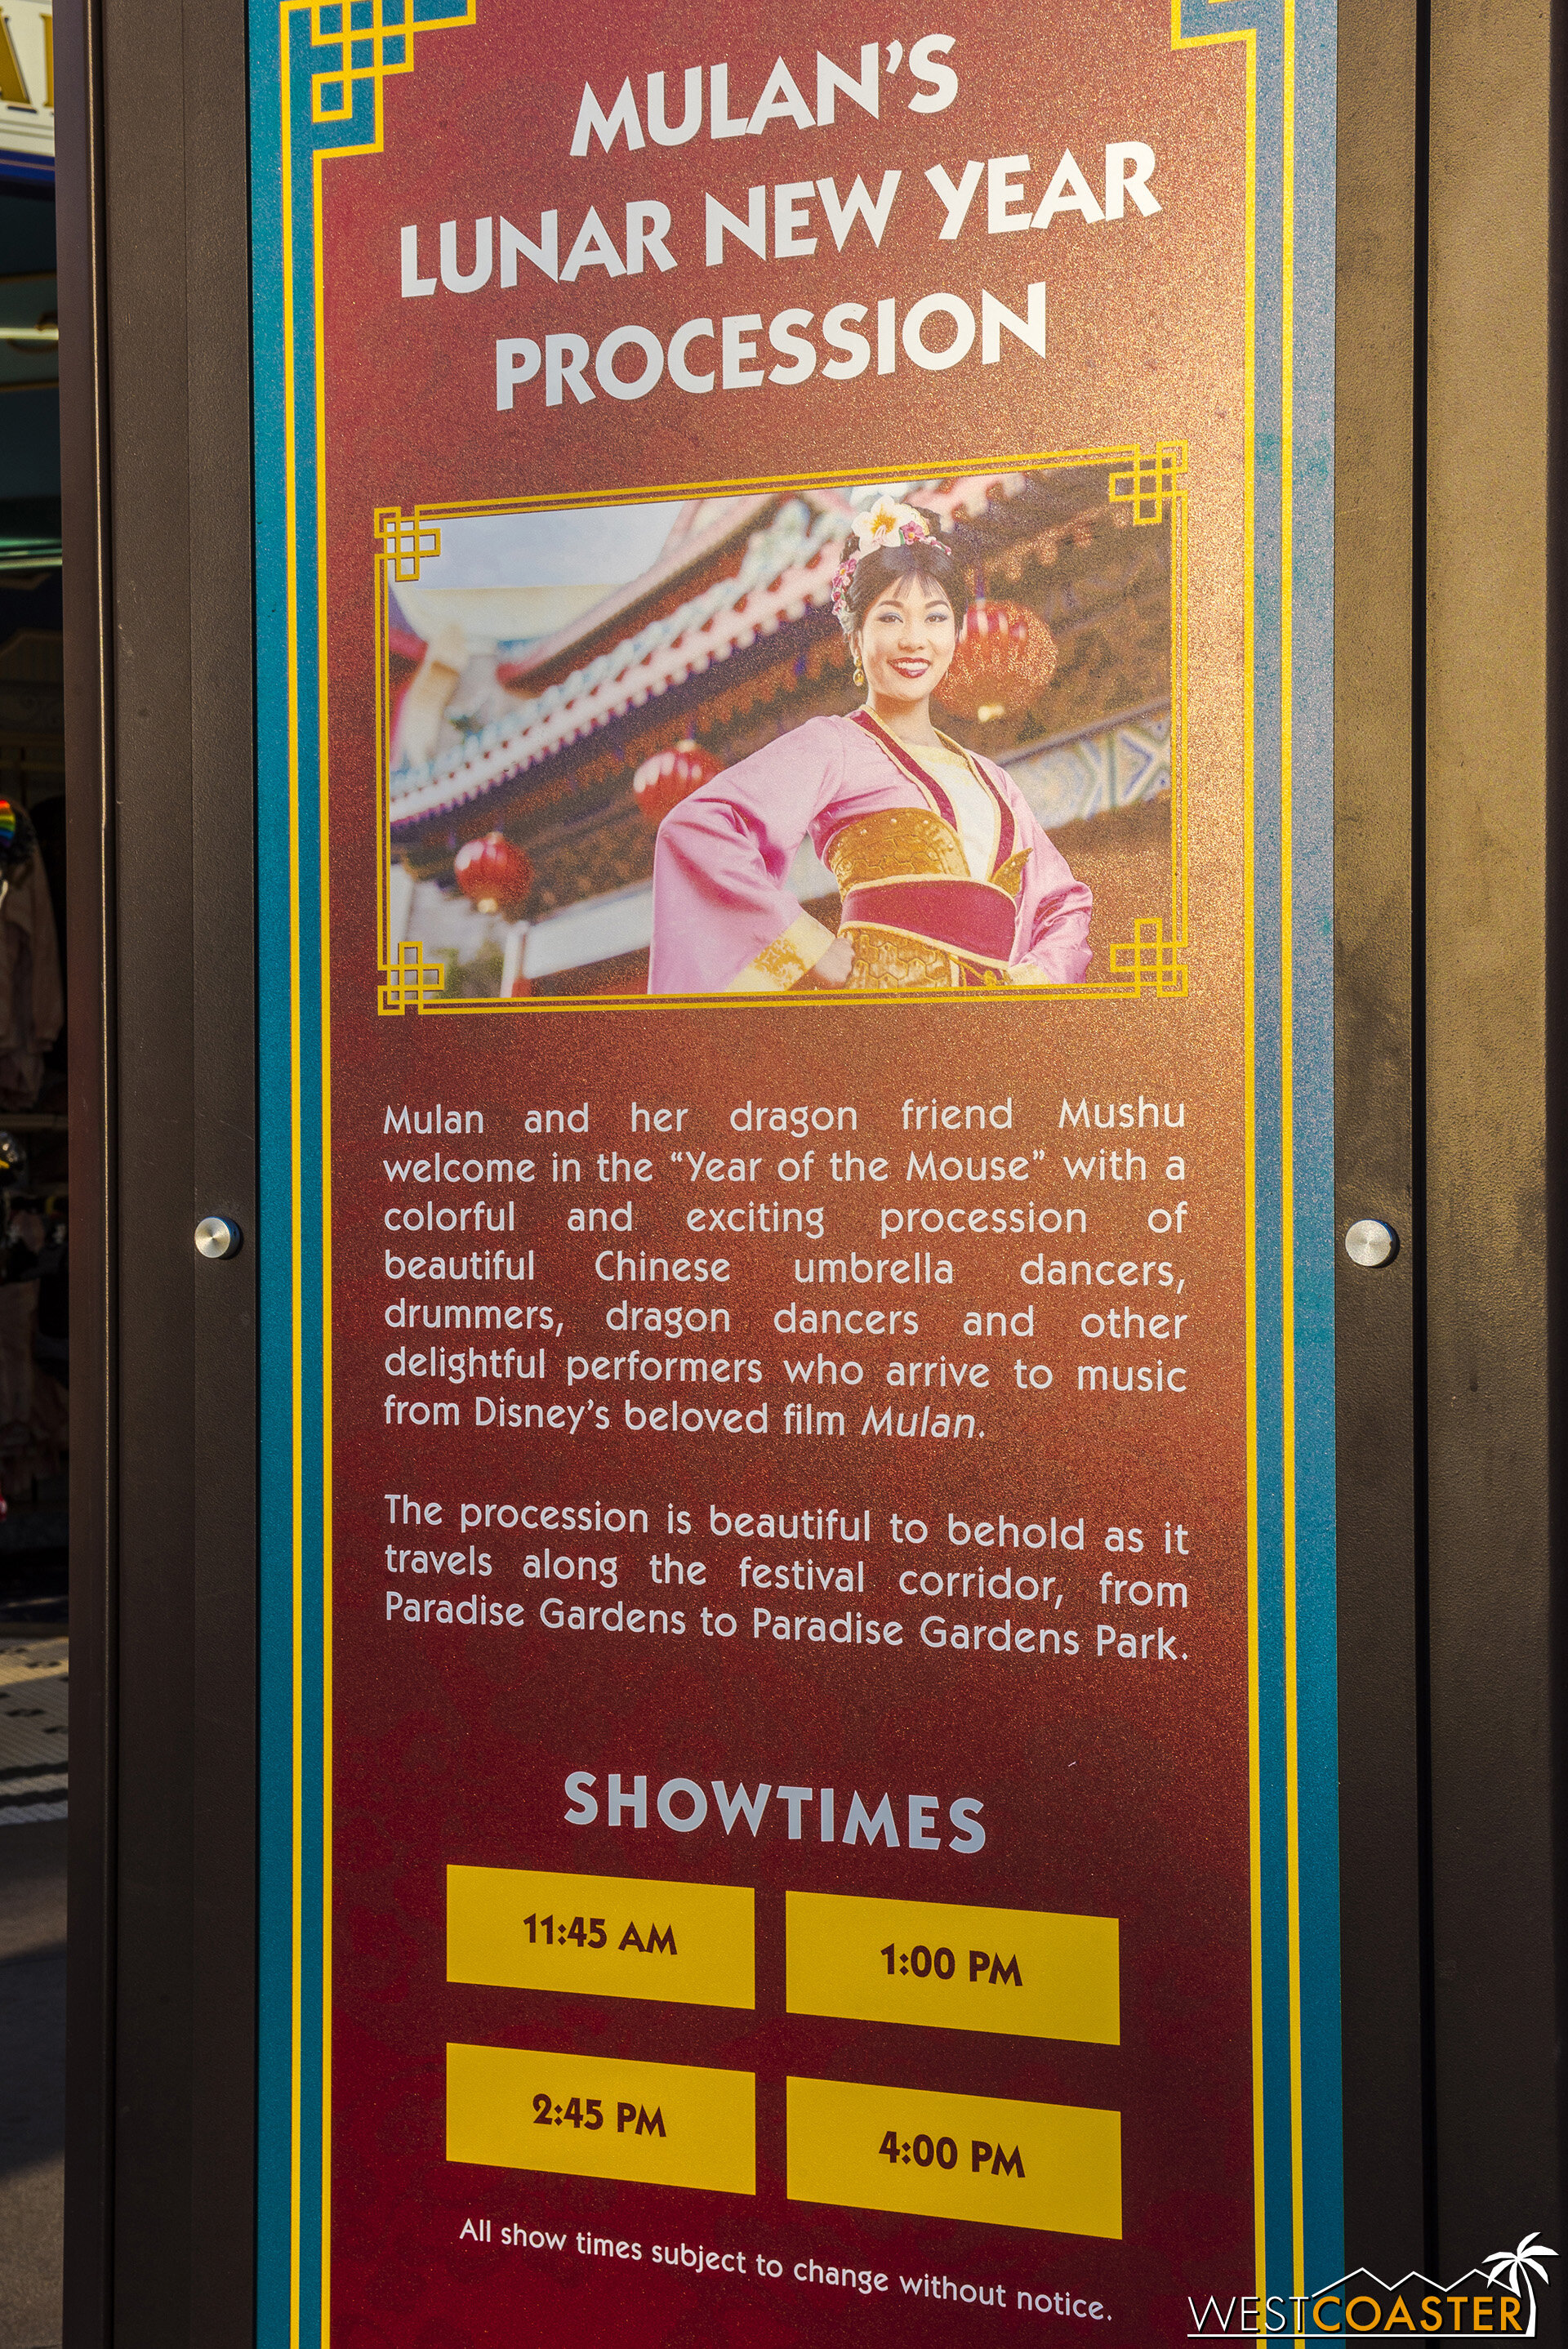  Showtimes for Mulan’s Lunar New Year Procession.  It’s daytime only. 